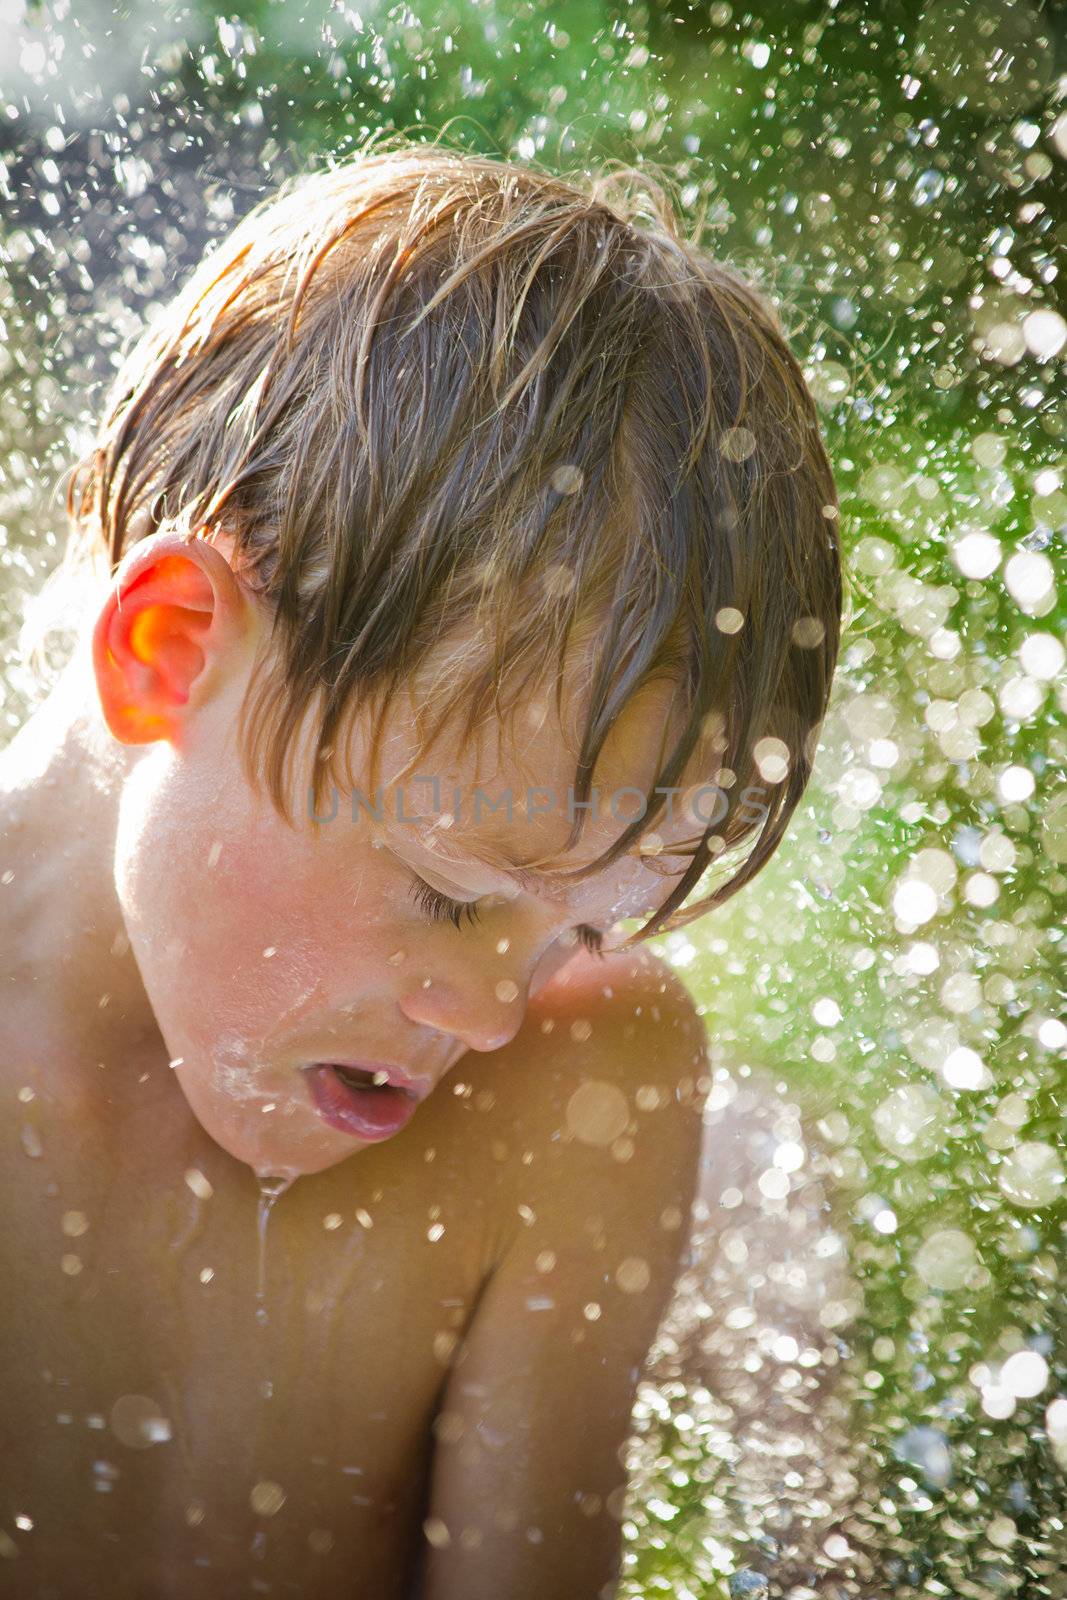 Young child playing in the water